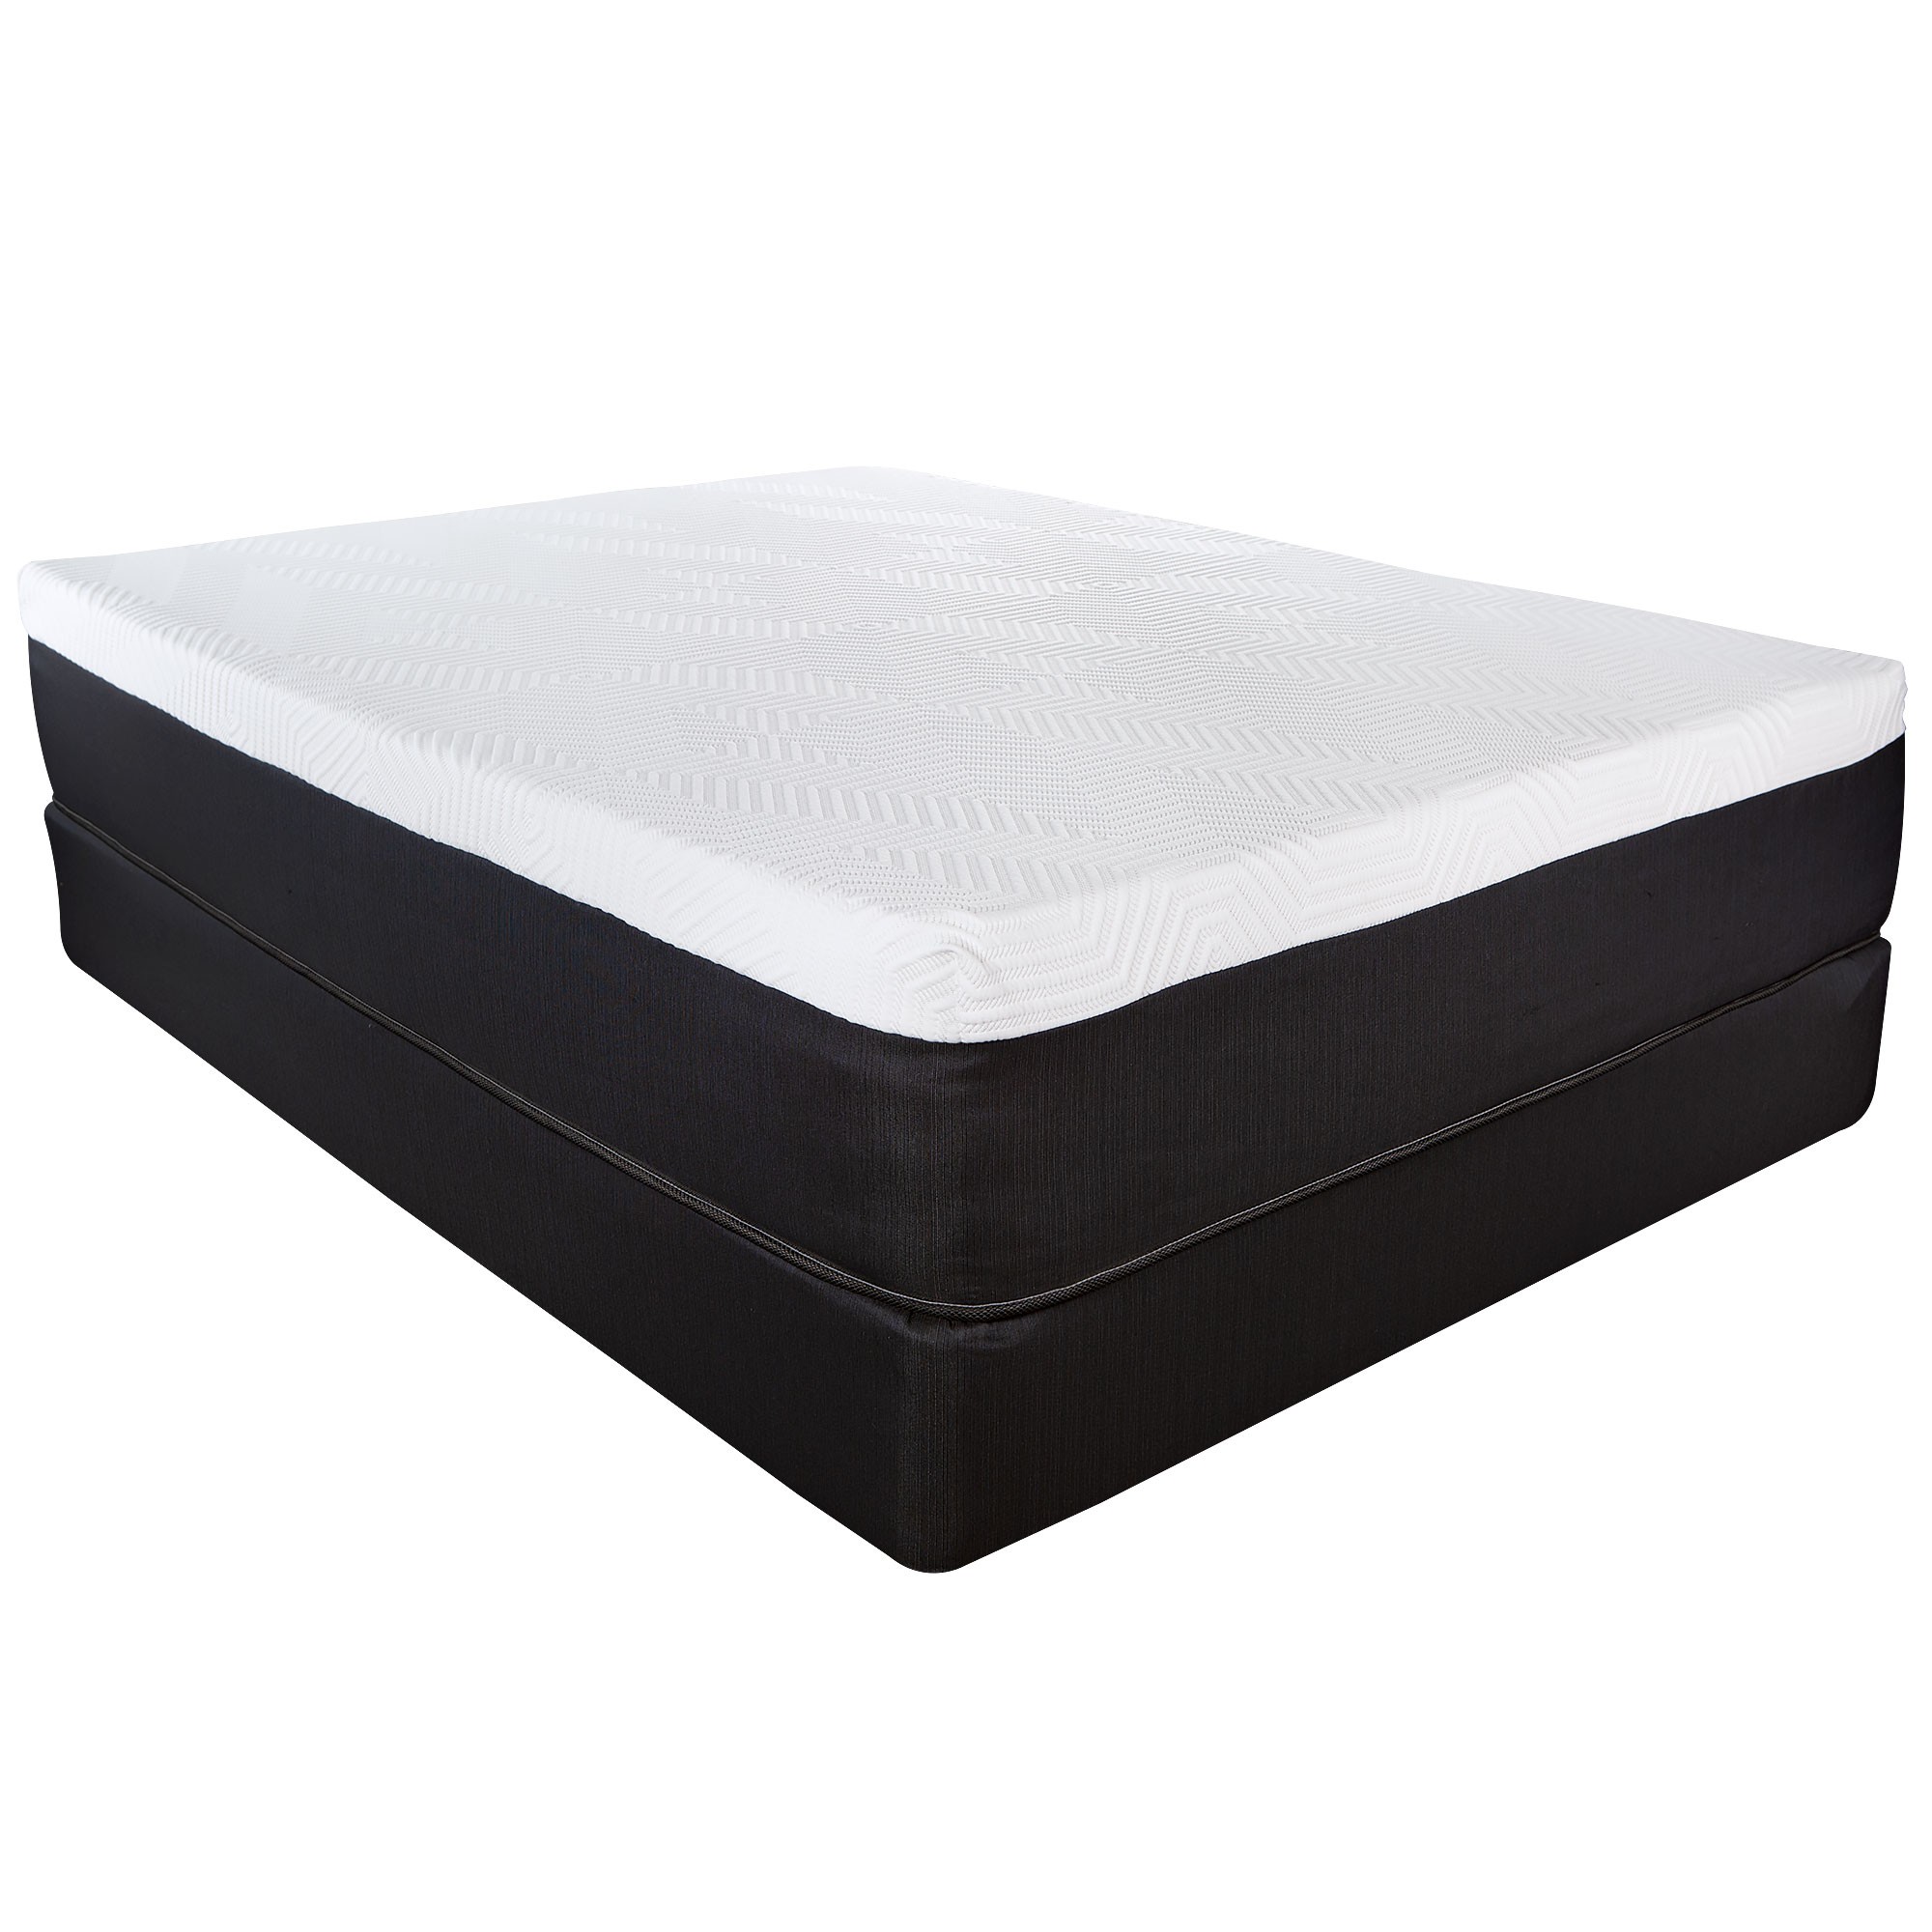 13" Hybrid Lux Memory Foam And Wrapped Coil Mattress King-391696-1